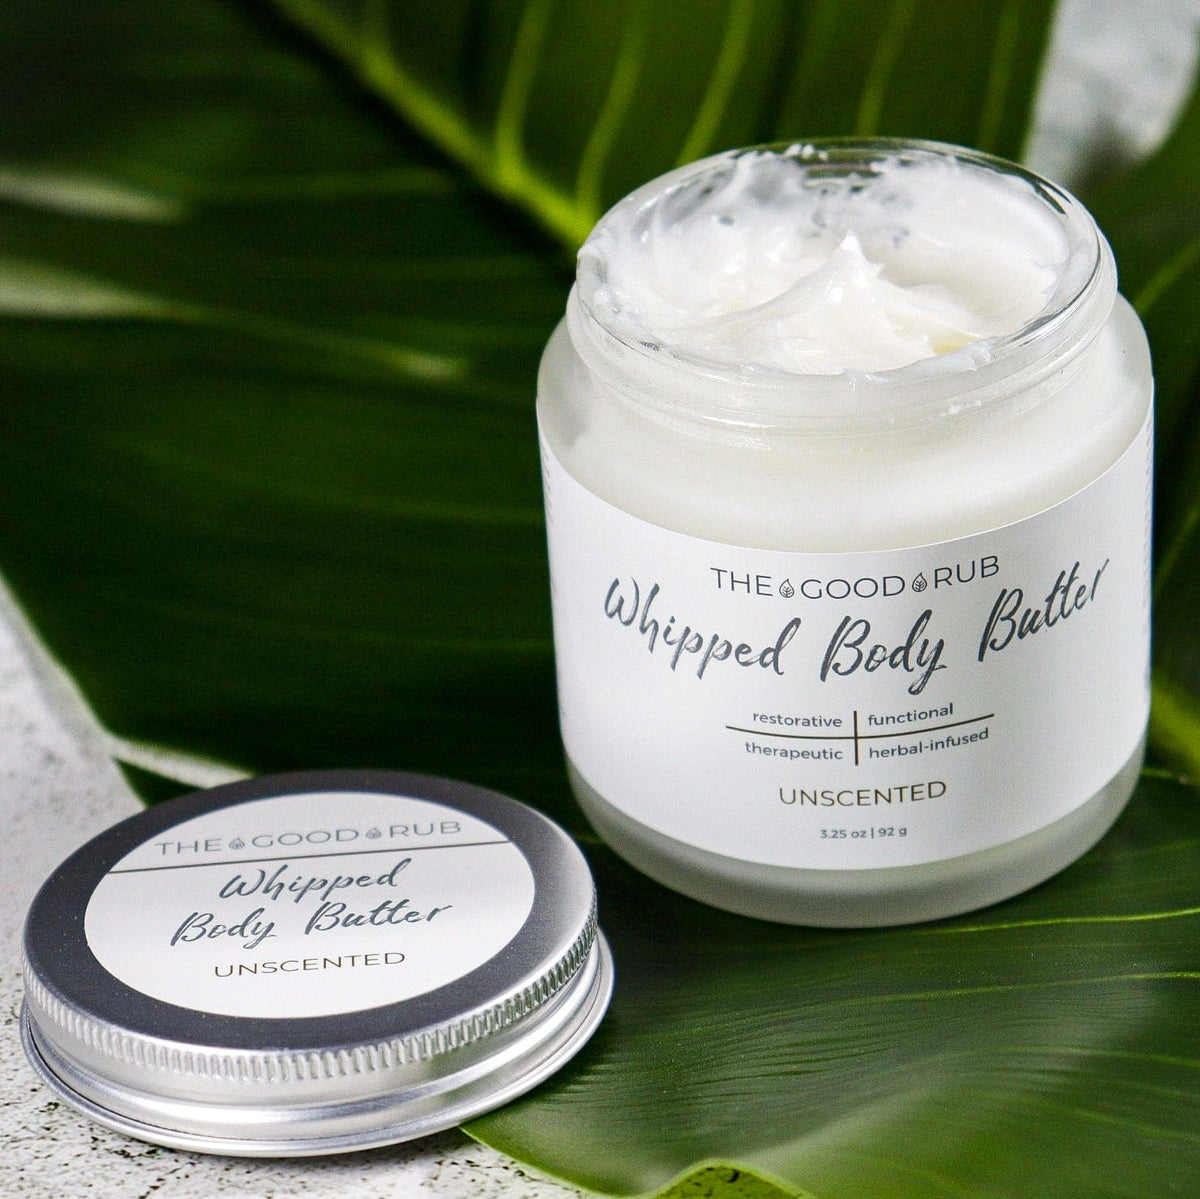 Unscented Whipped Body Butter - The Good Rub